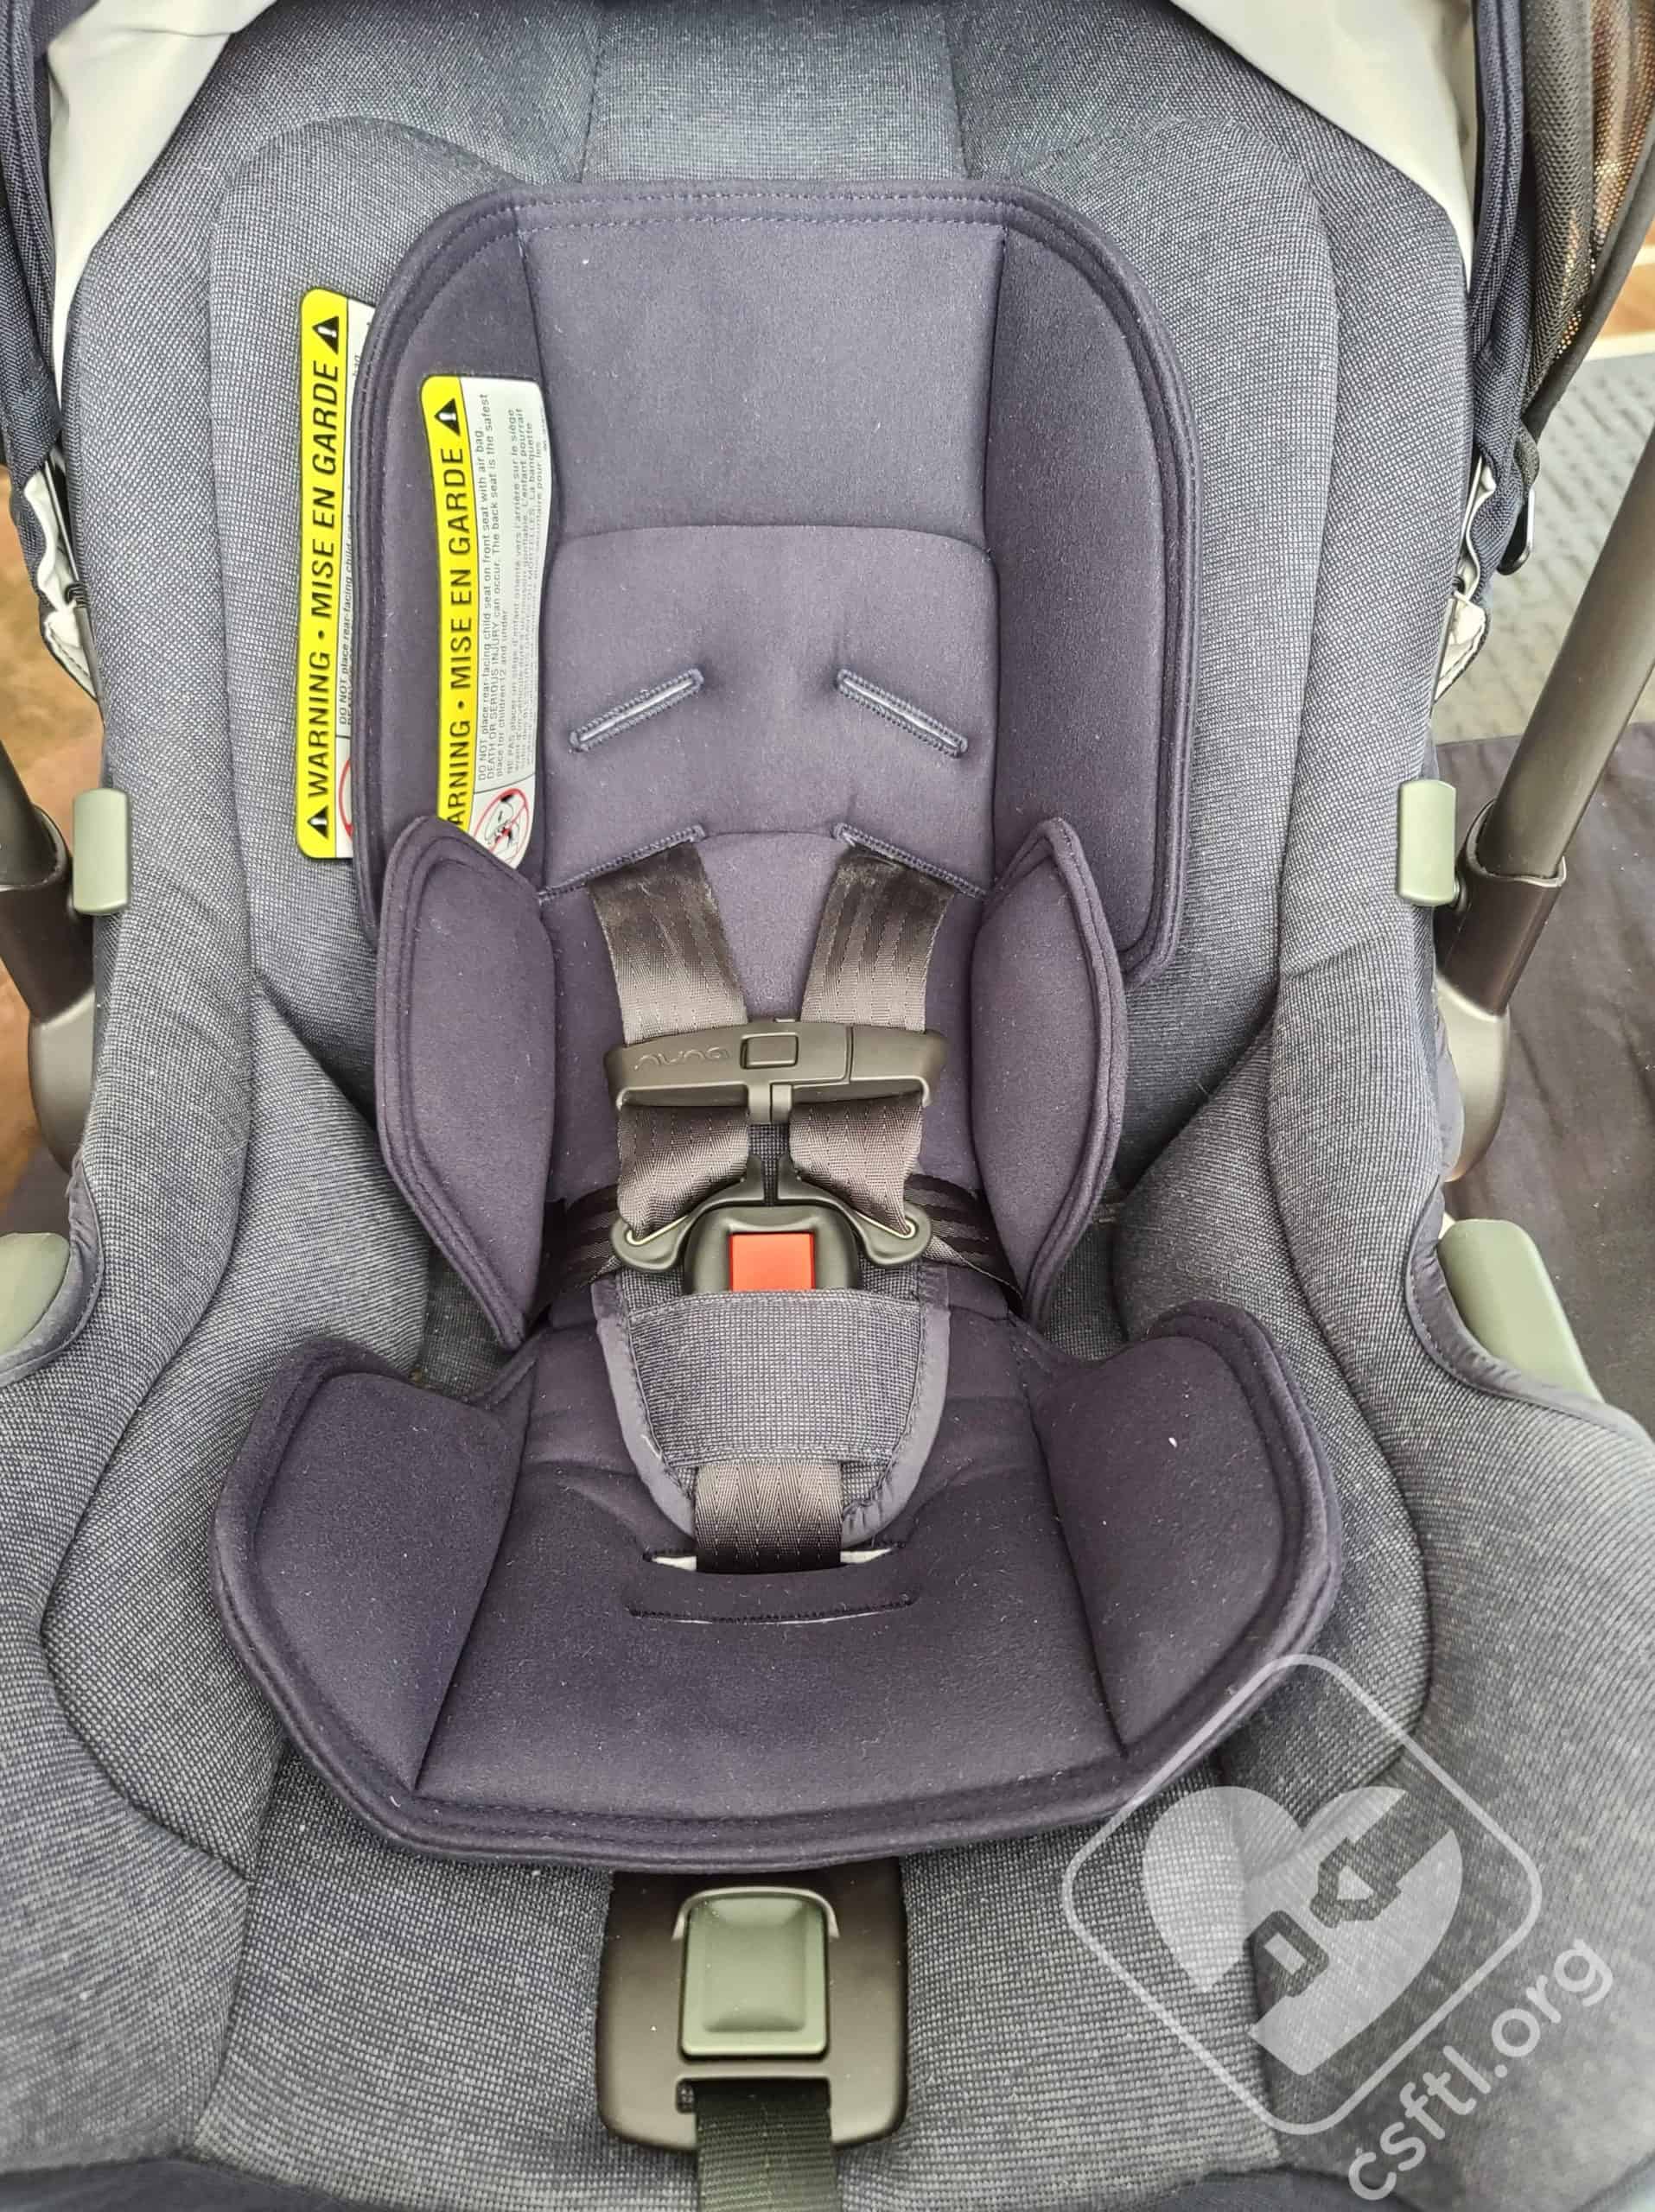 Nuna Pipa Review - Car Seats For The Littles